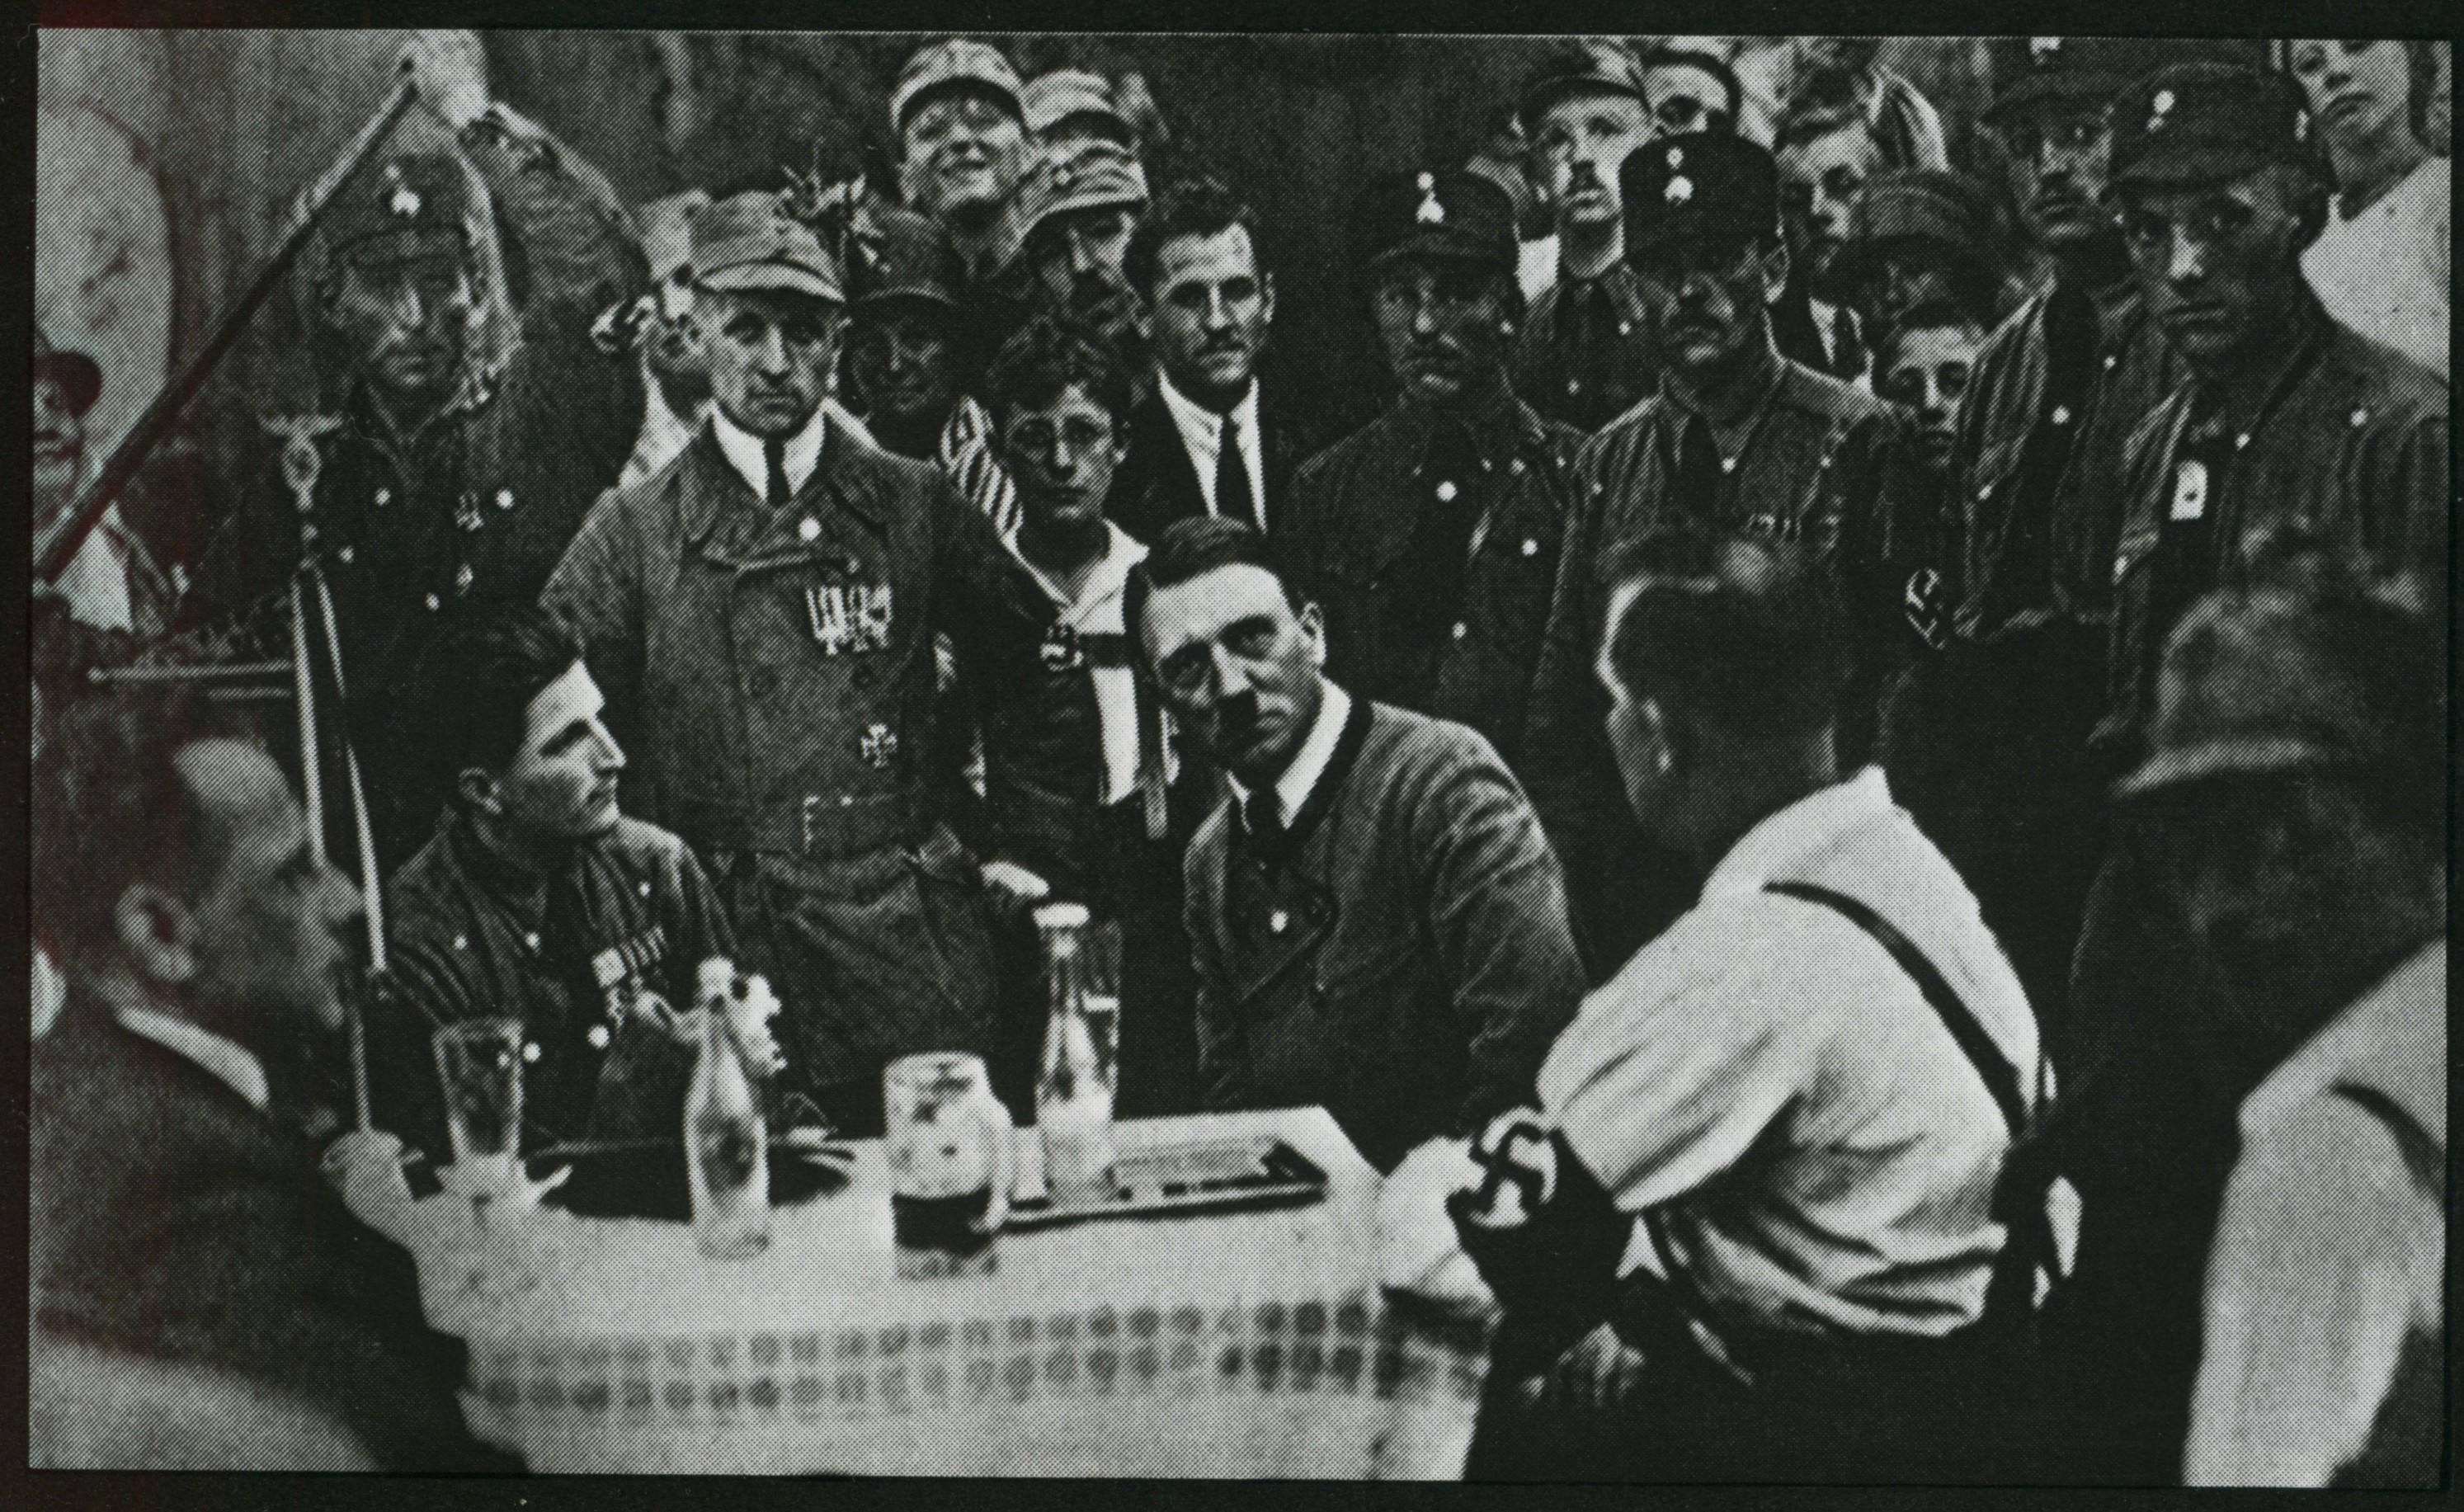 Meeting of the members of the NSDAP in Munich. In the center sits Adolf Hitler.